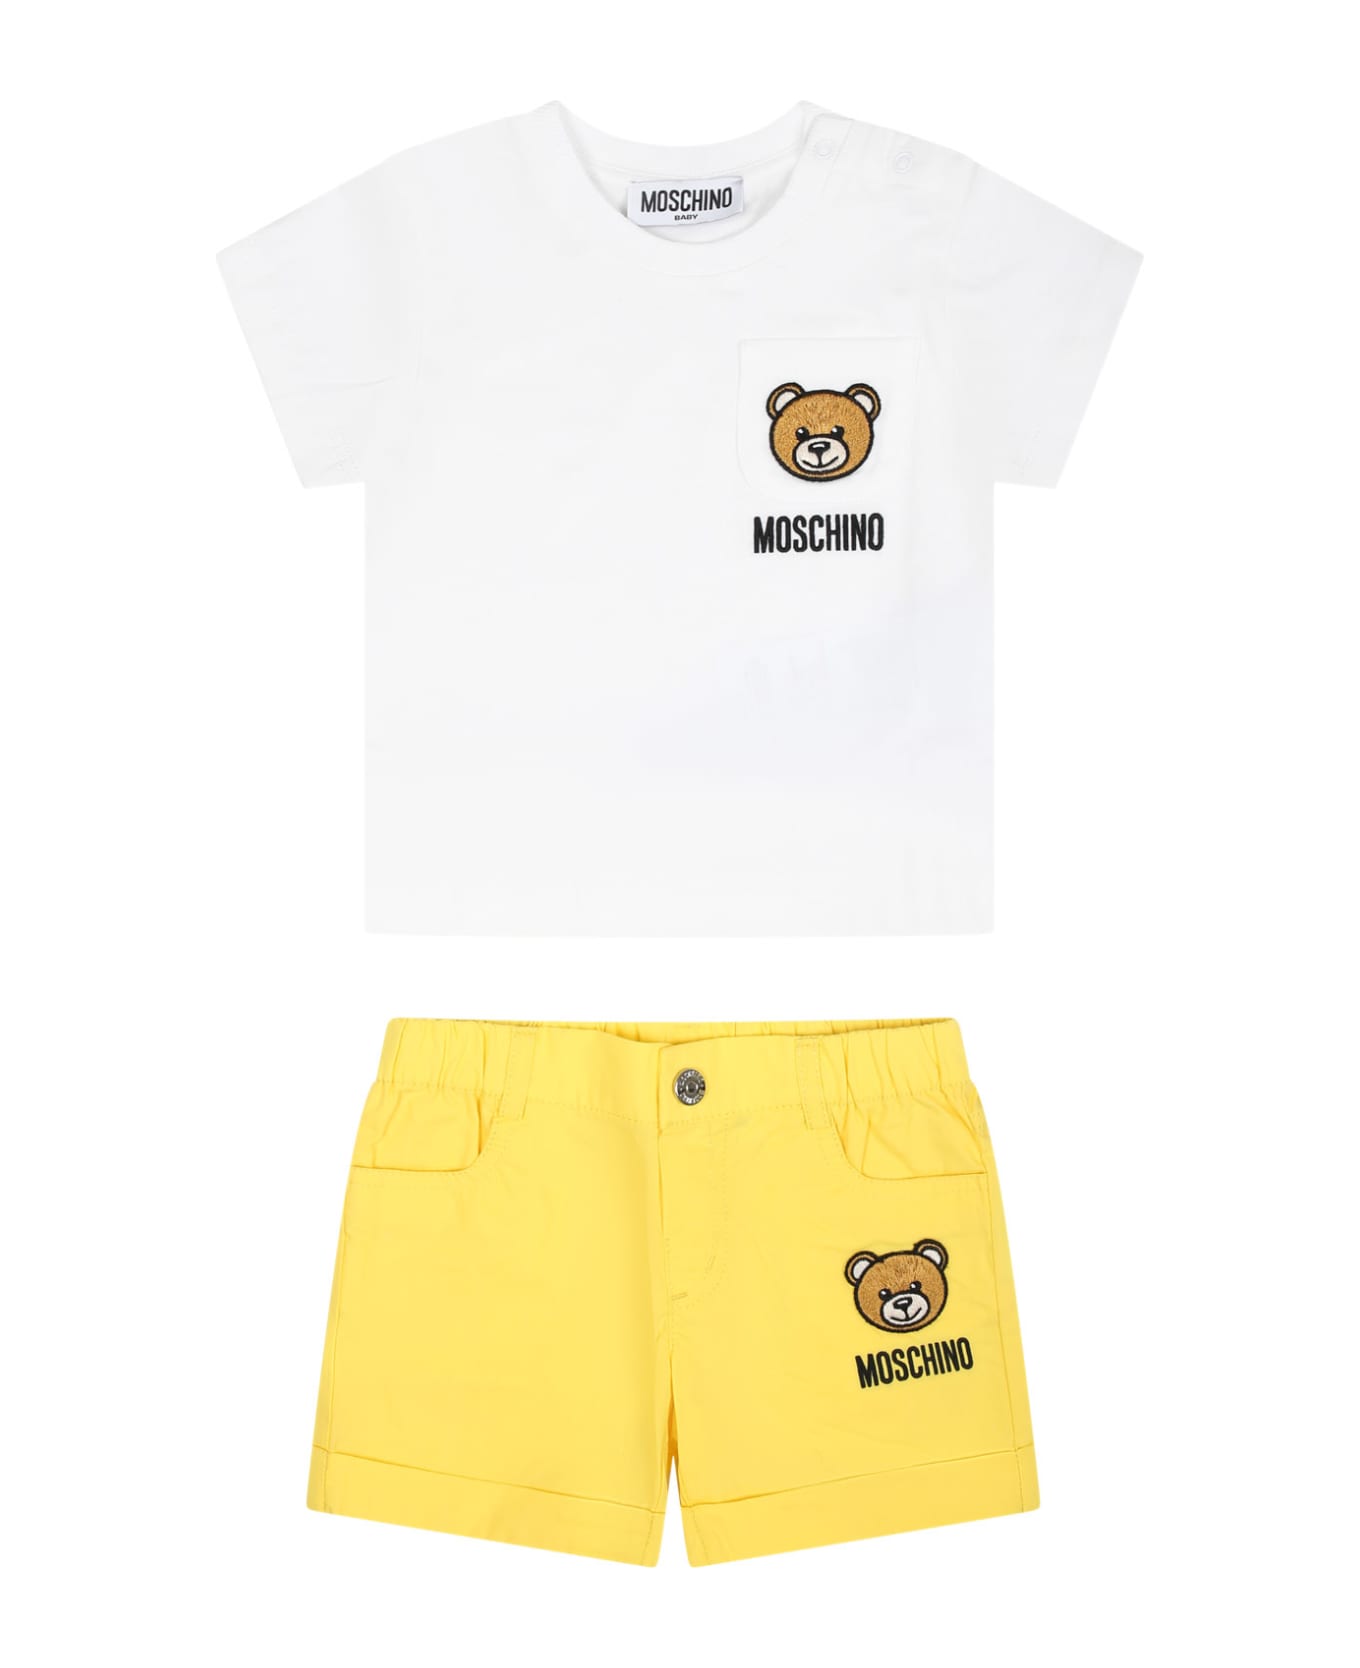 Moschino Multicolor Sports Suit For Baby Kids - YELLOW/WHITE ボトムス